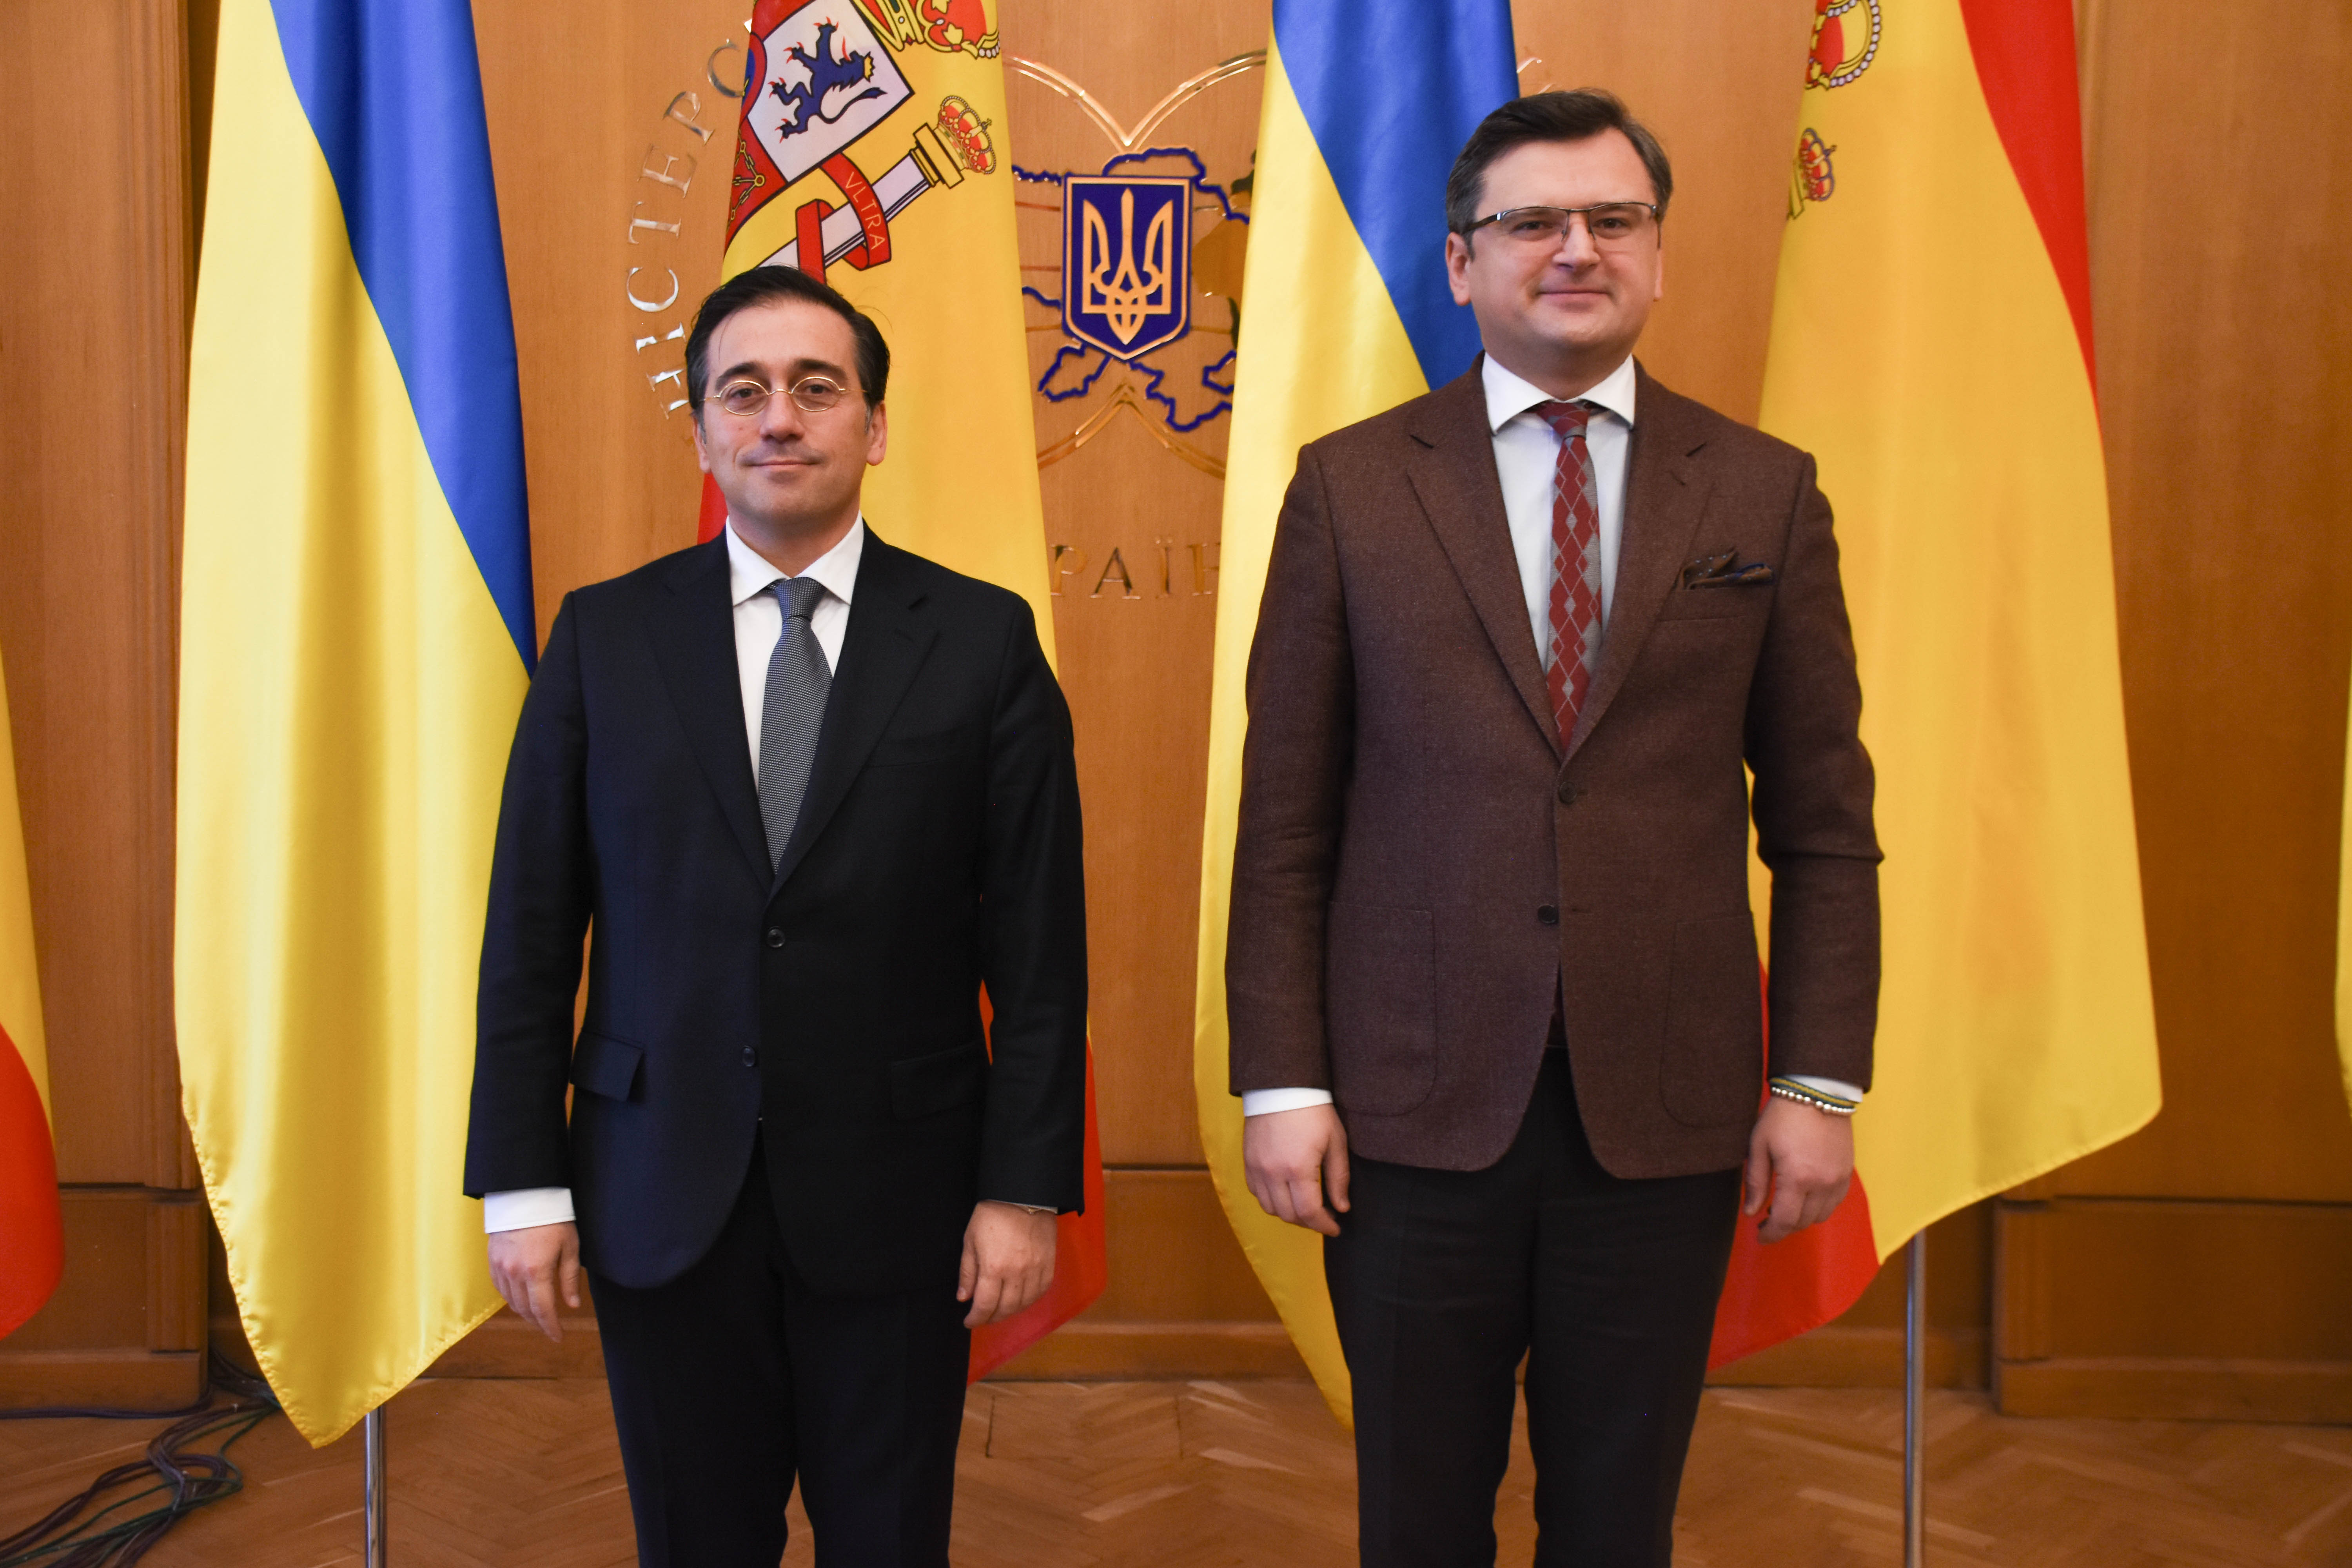 Spanish Foreign Minister Jose Manuel Albares (L) with Foreign Minister Ukrainian Dmytro Kuleba.